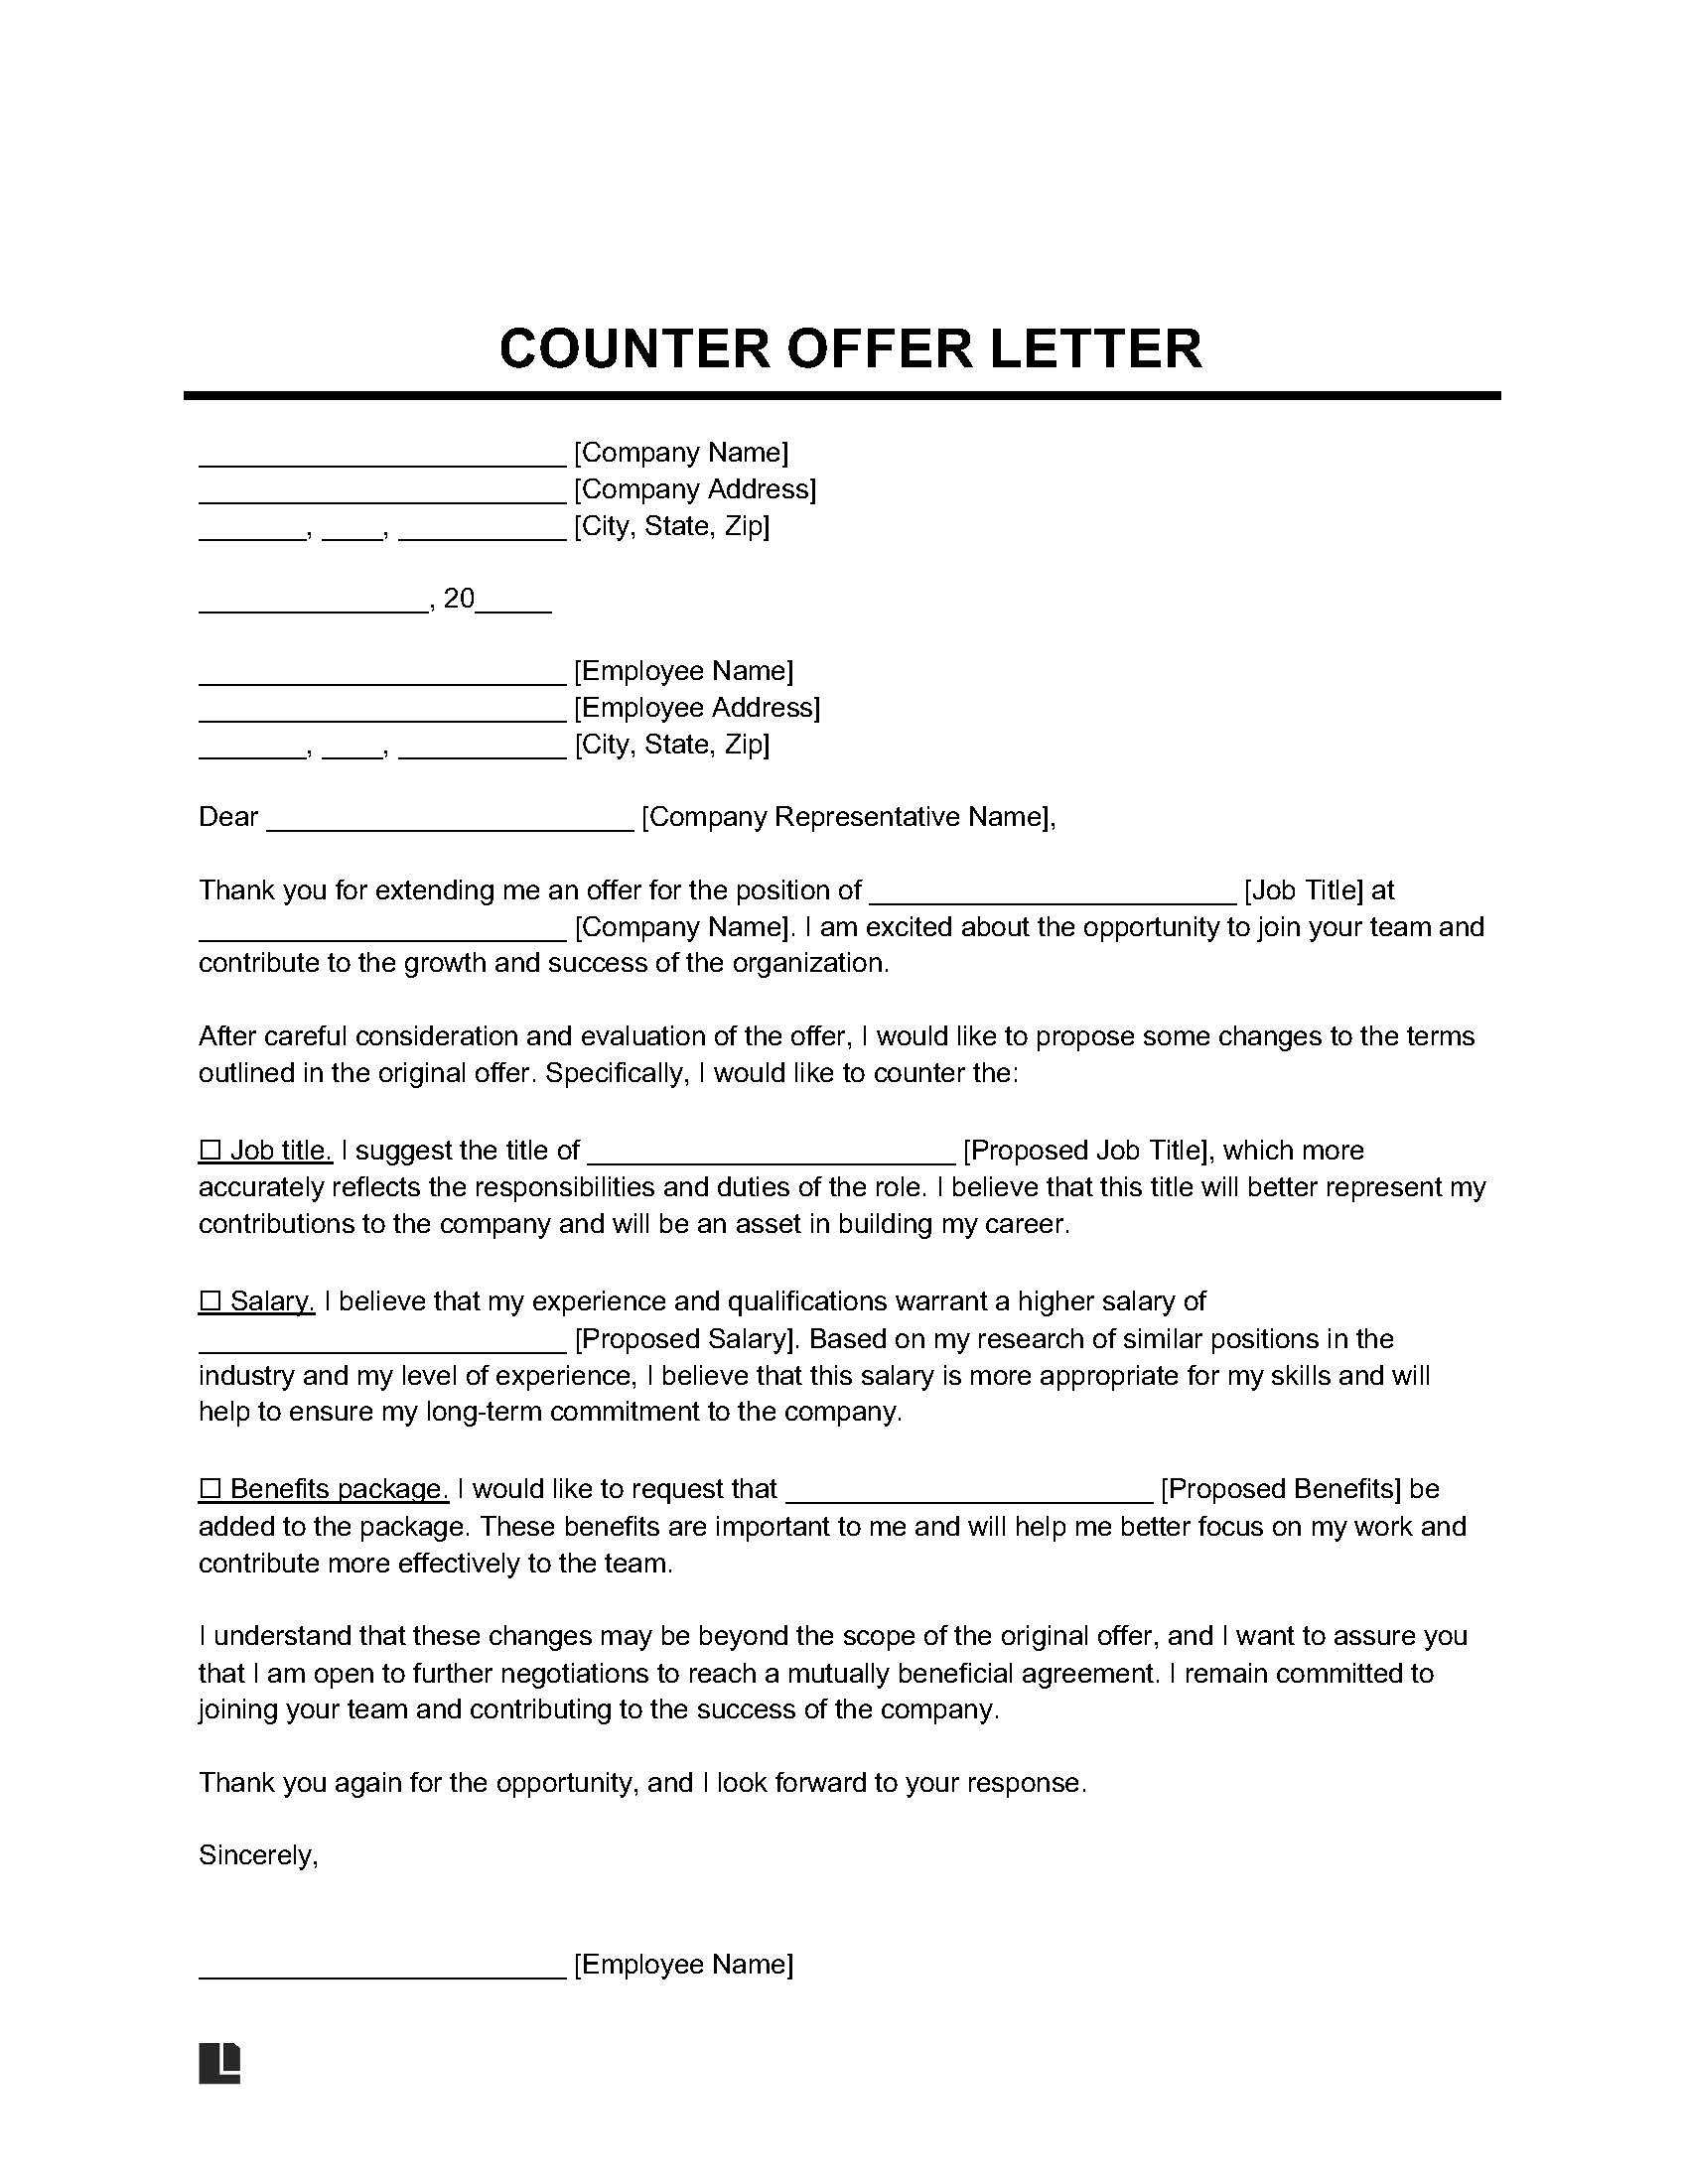 Counter Offer Letter Template